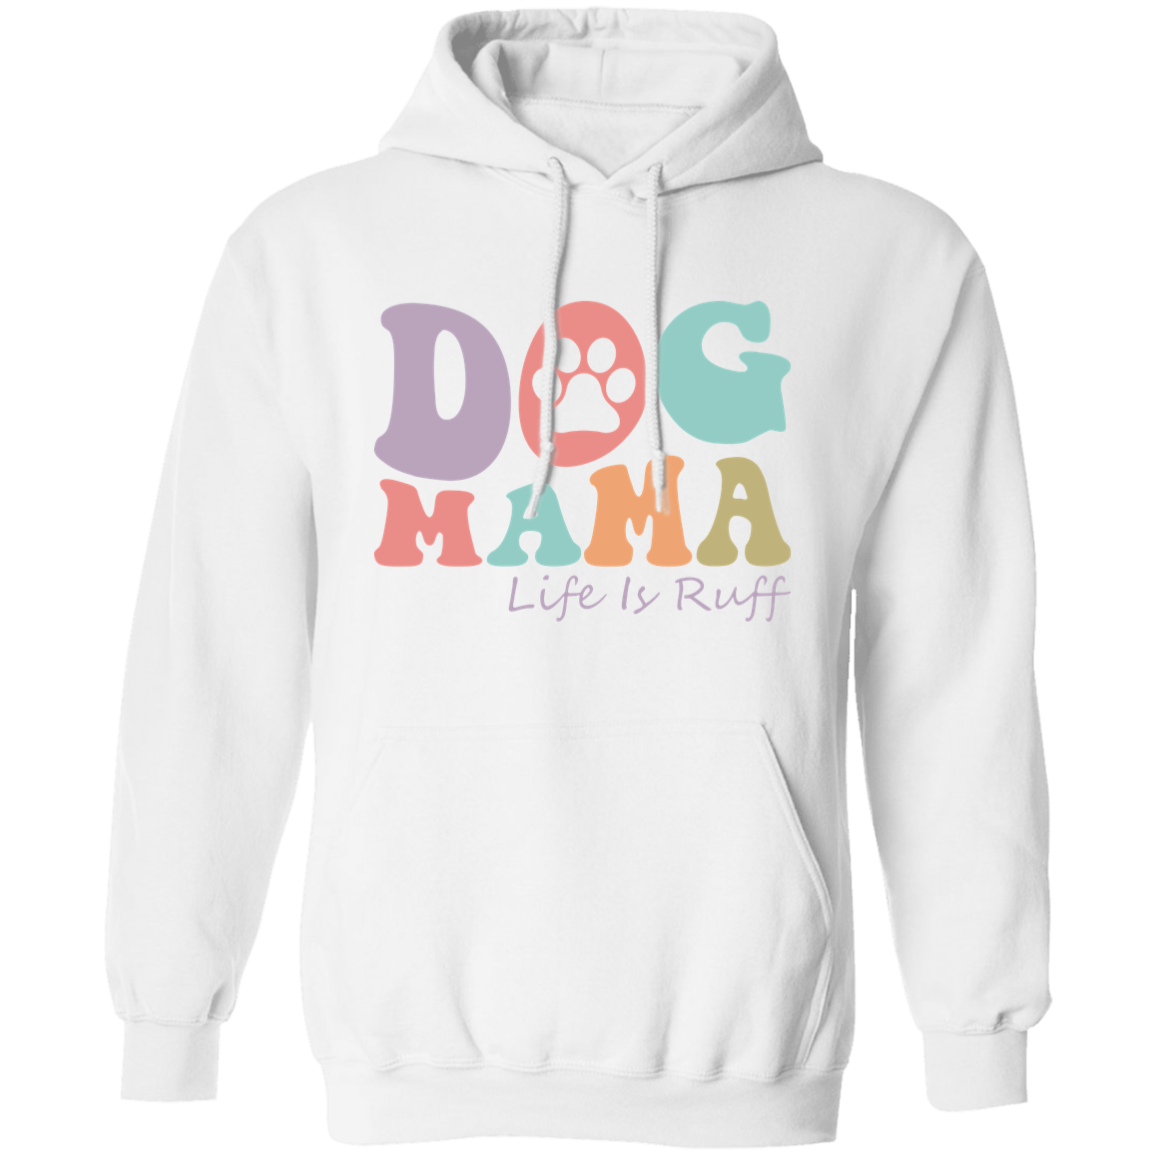 Dog Mama Life is Ruff Rescue Pullover Hoodie Hooded Sweatshirt